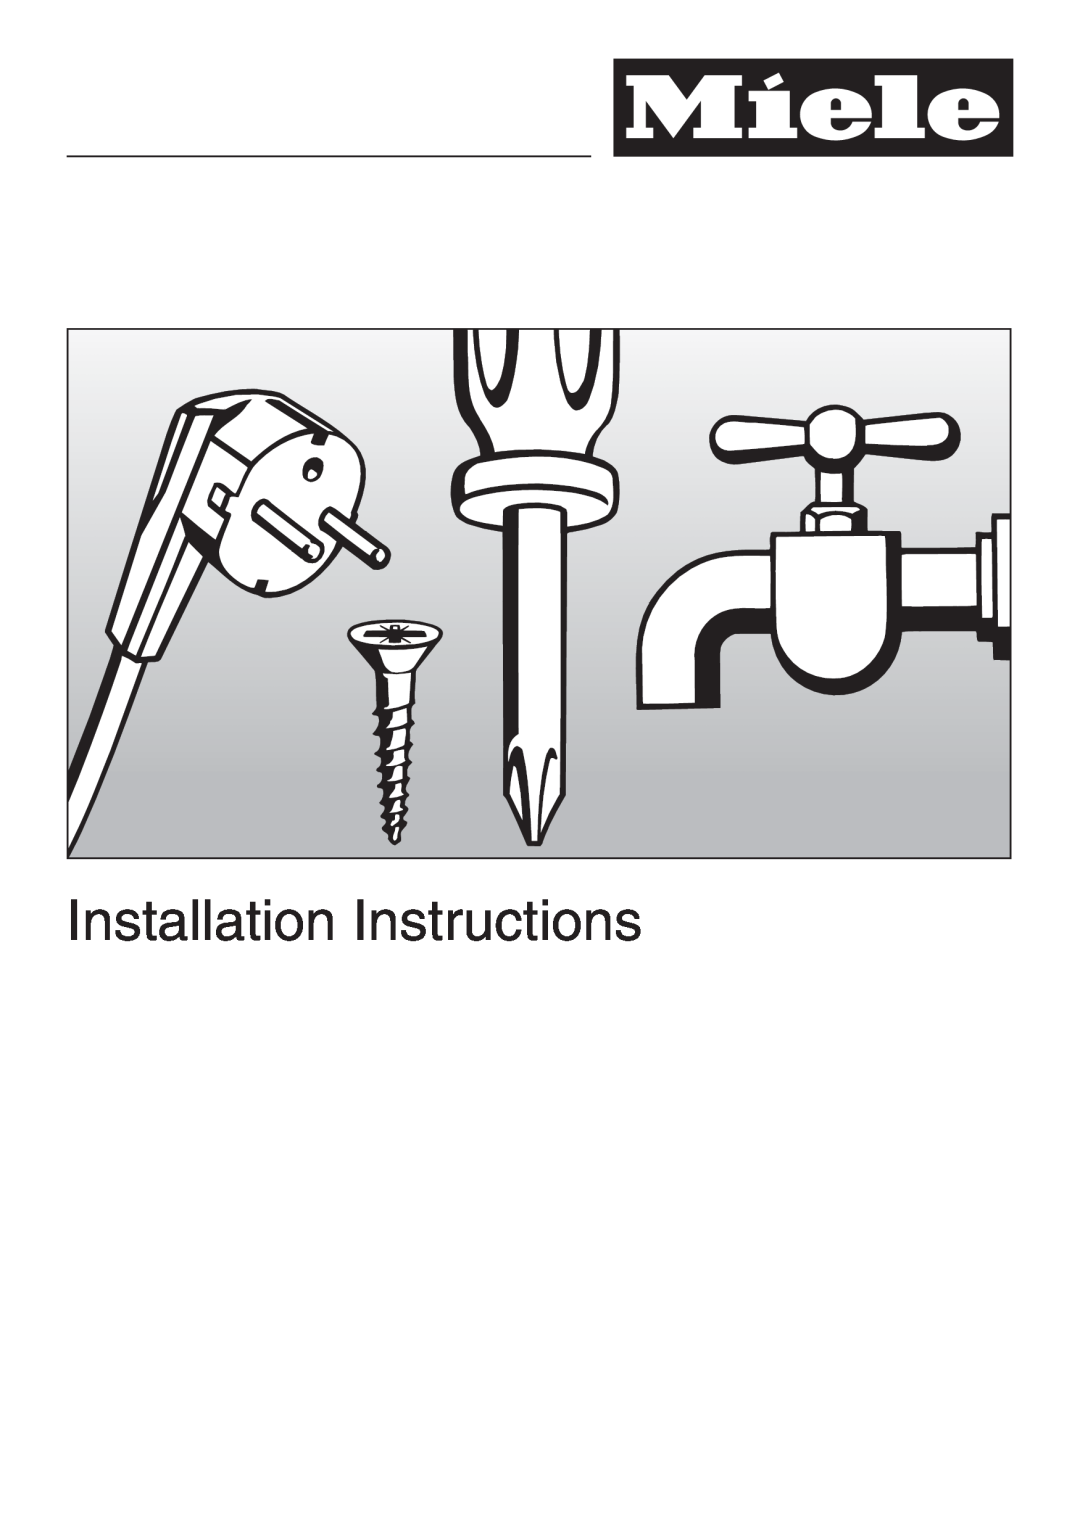 Miele T 1413 T 1415 operating instructions Installation Instructions 